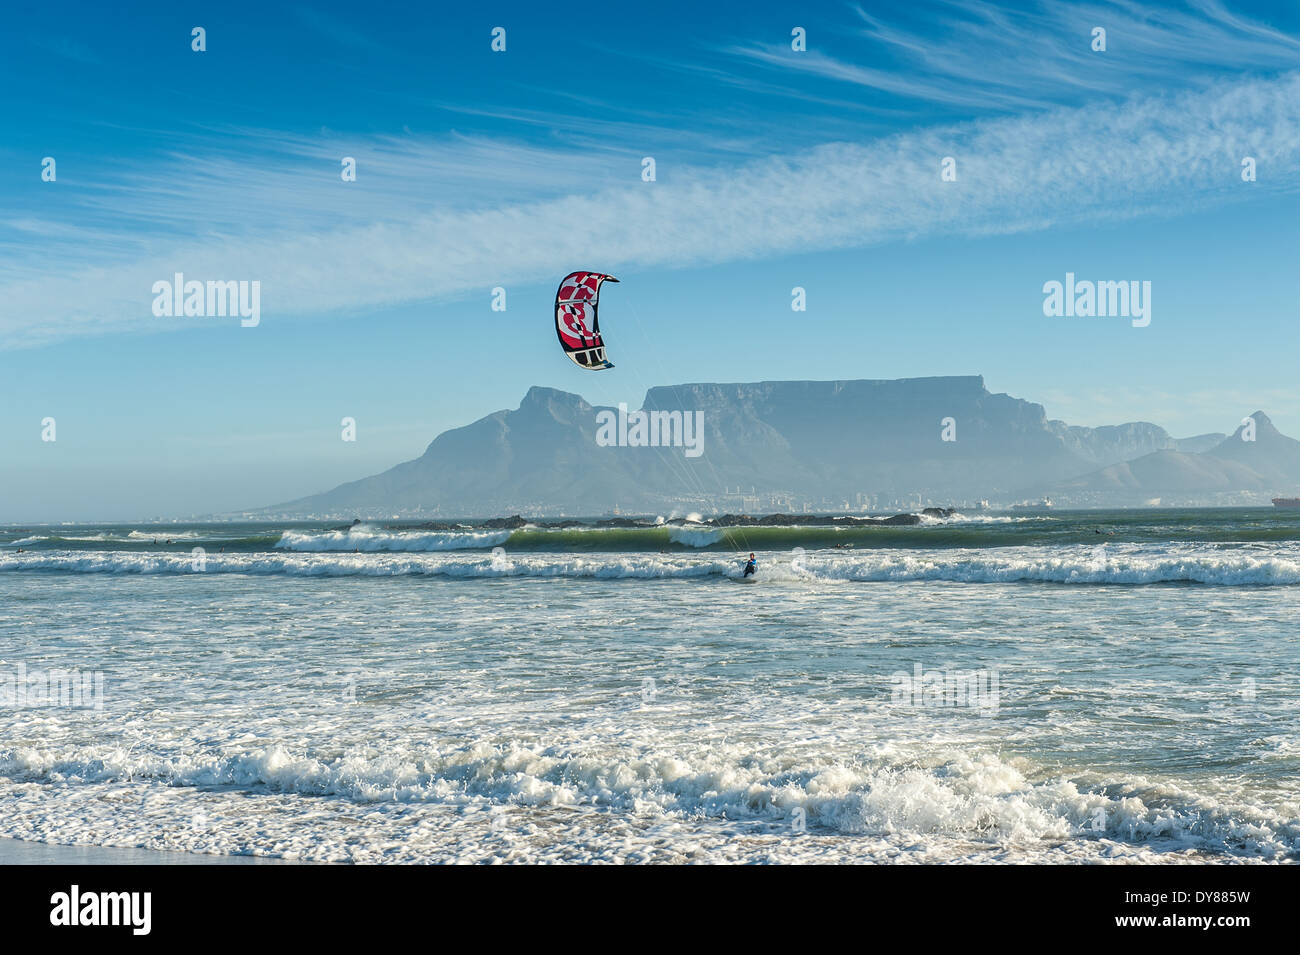 Kitesurfer in Bloubergstrand, Table Mountain in the background, South Africa Stock Photo